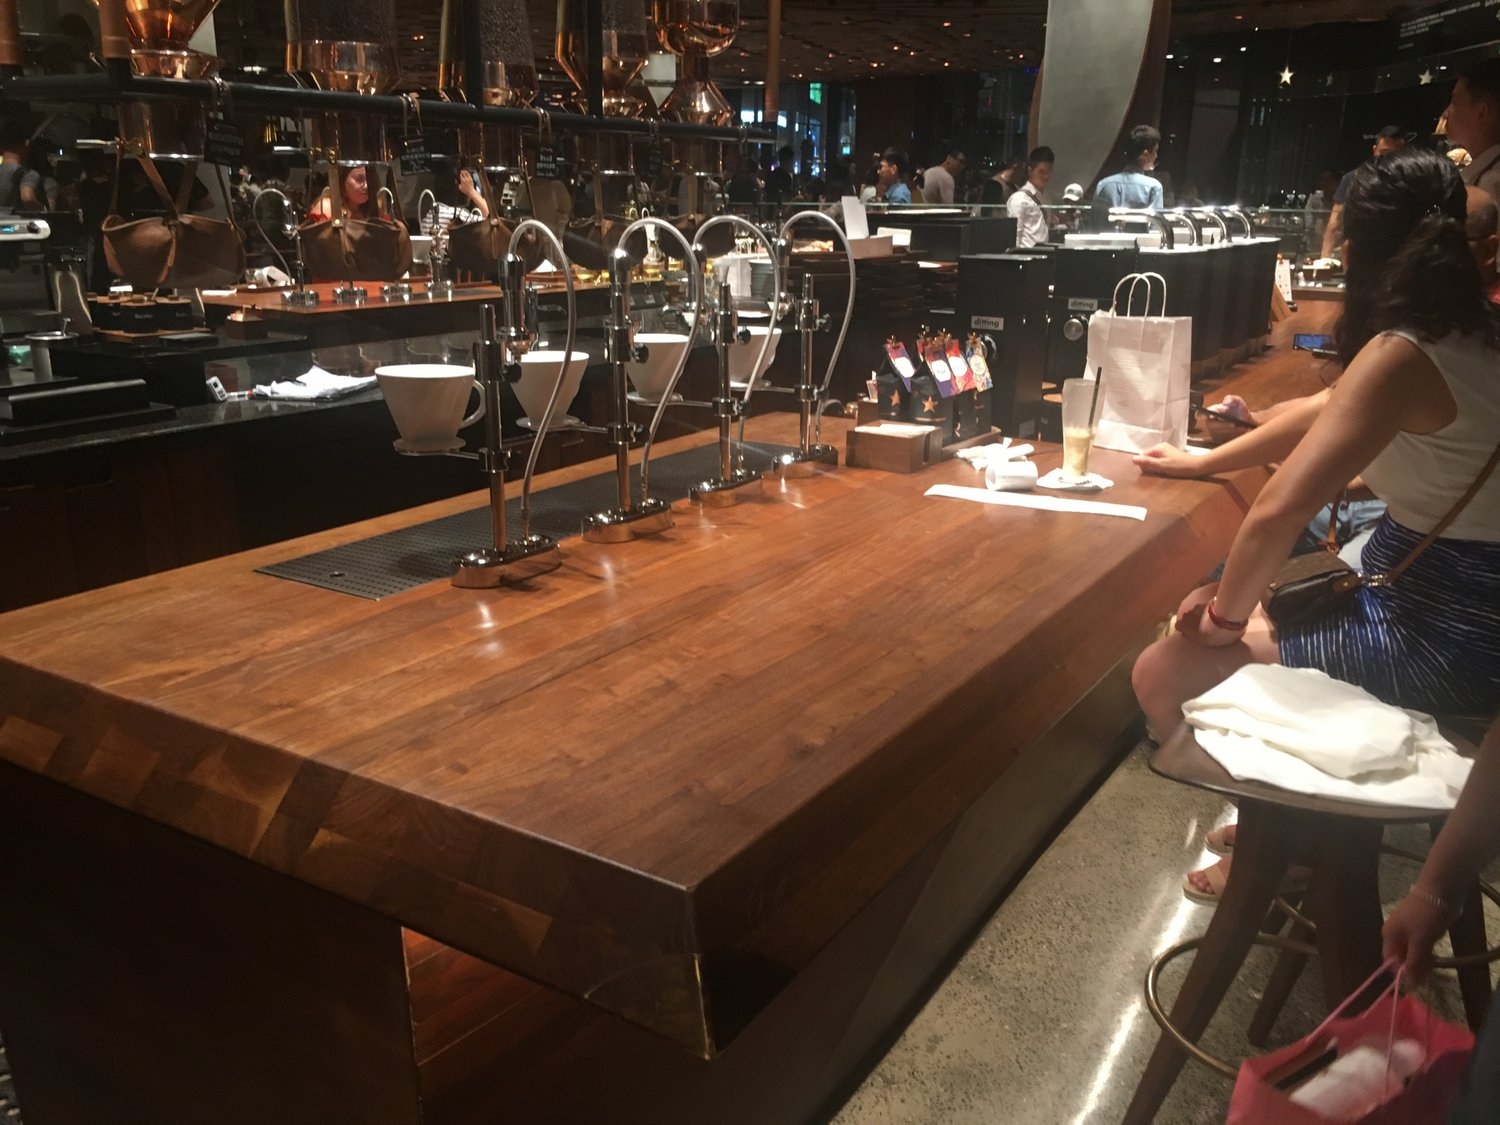 Solid stave walnut bar table counter customize